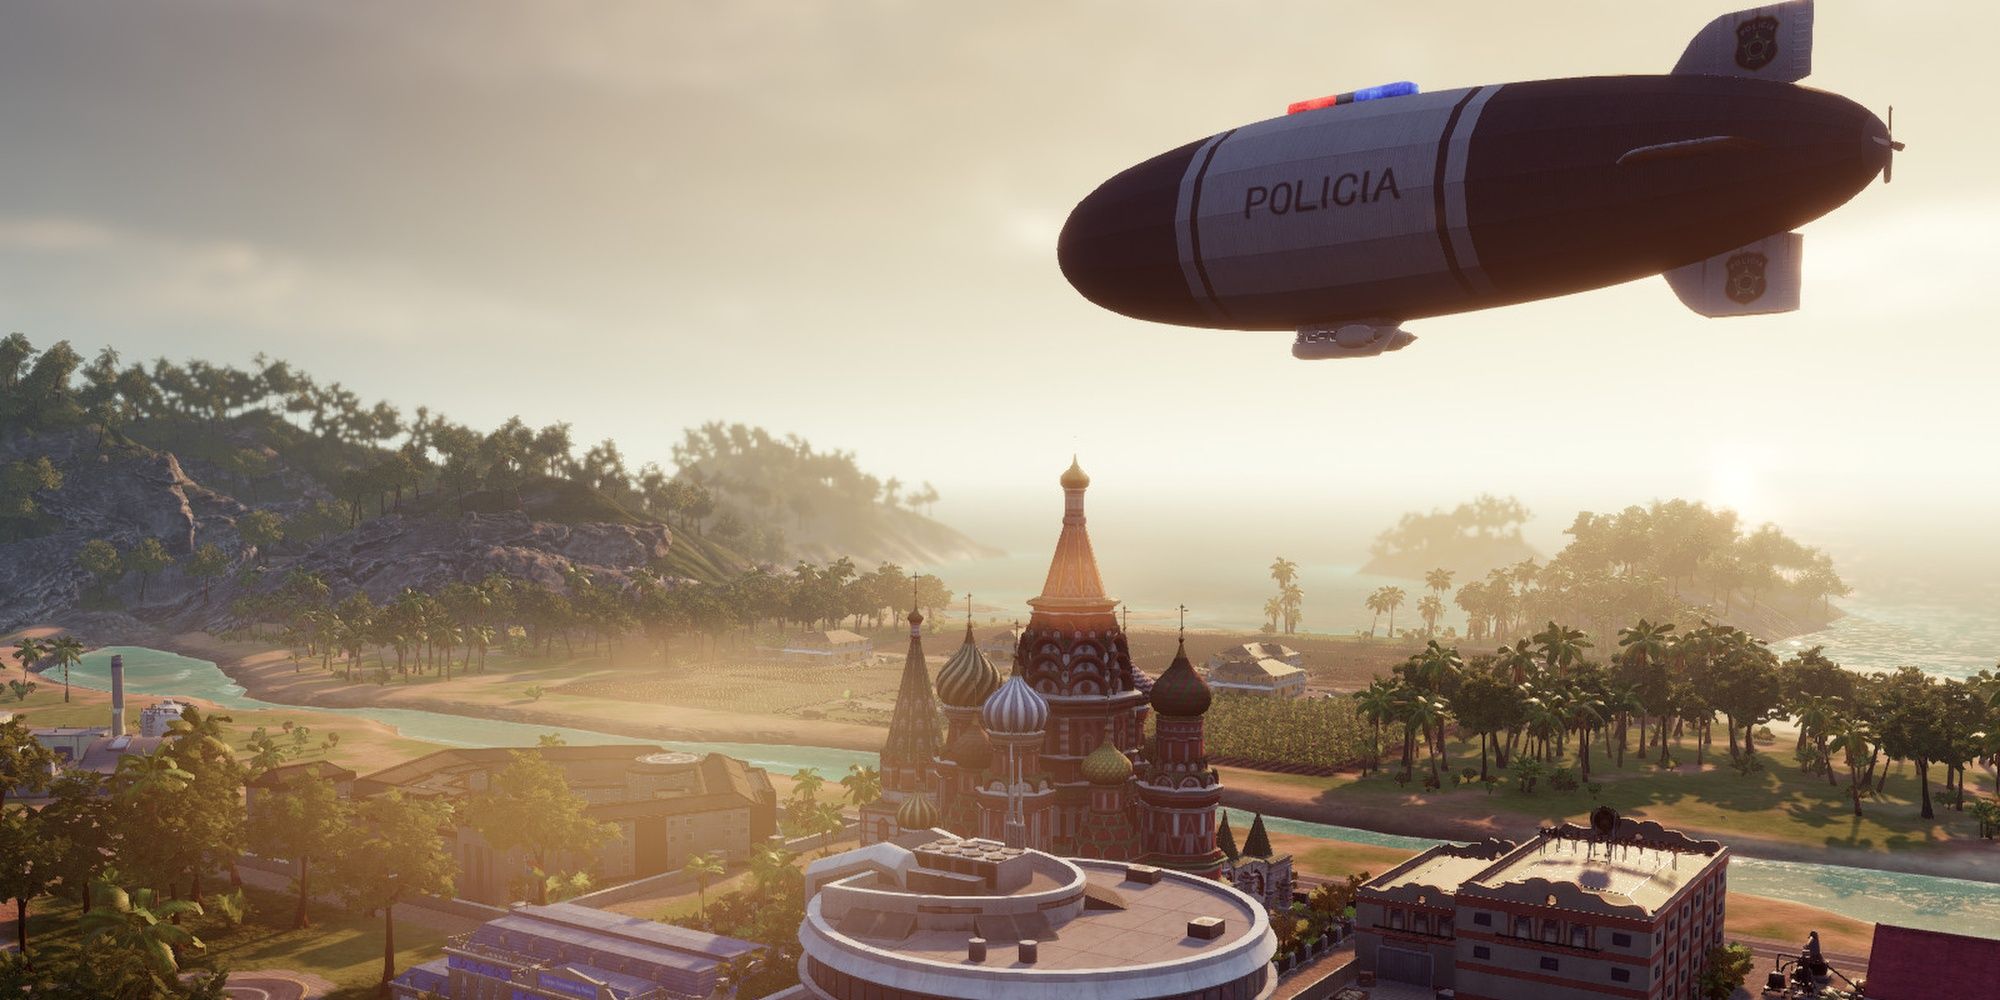 Police Blimp In Tropico 6 Shows An Increase In Security Measures When War Is Around The Corner